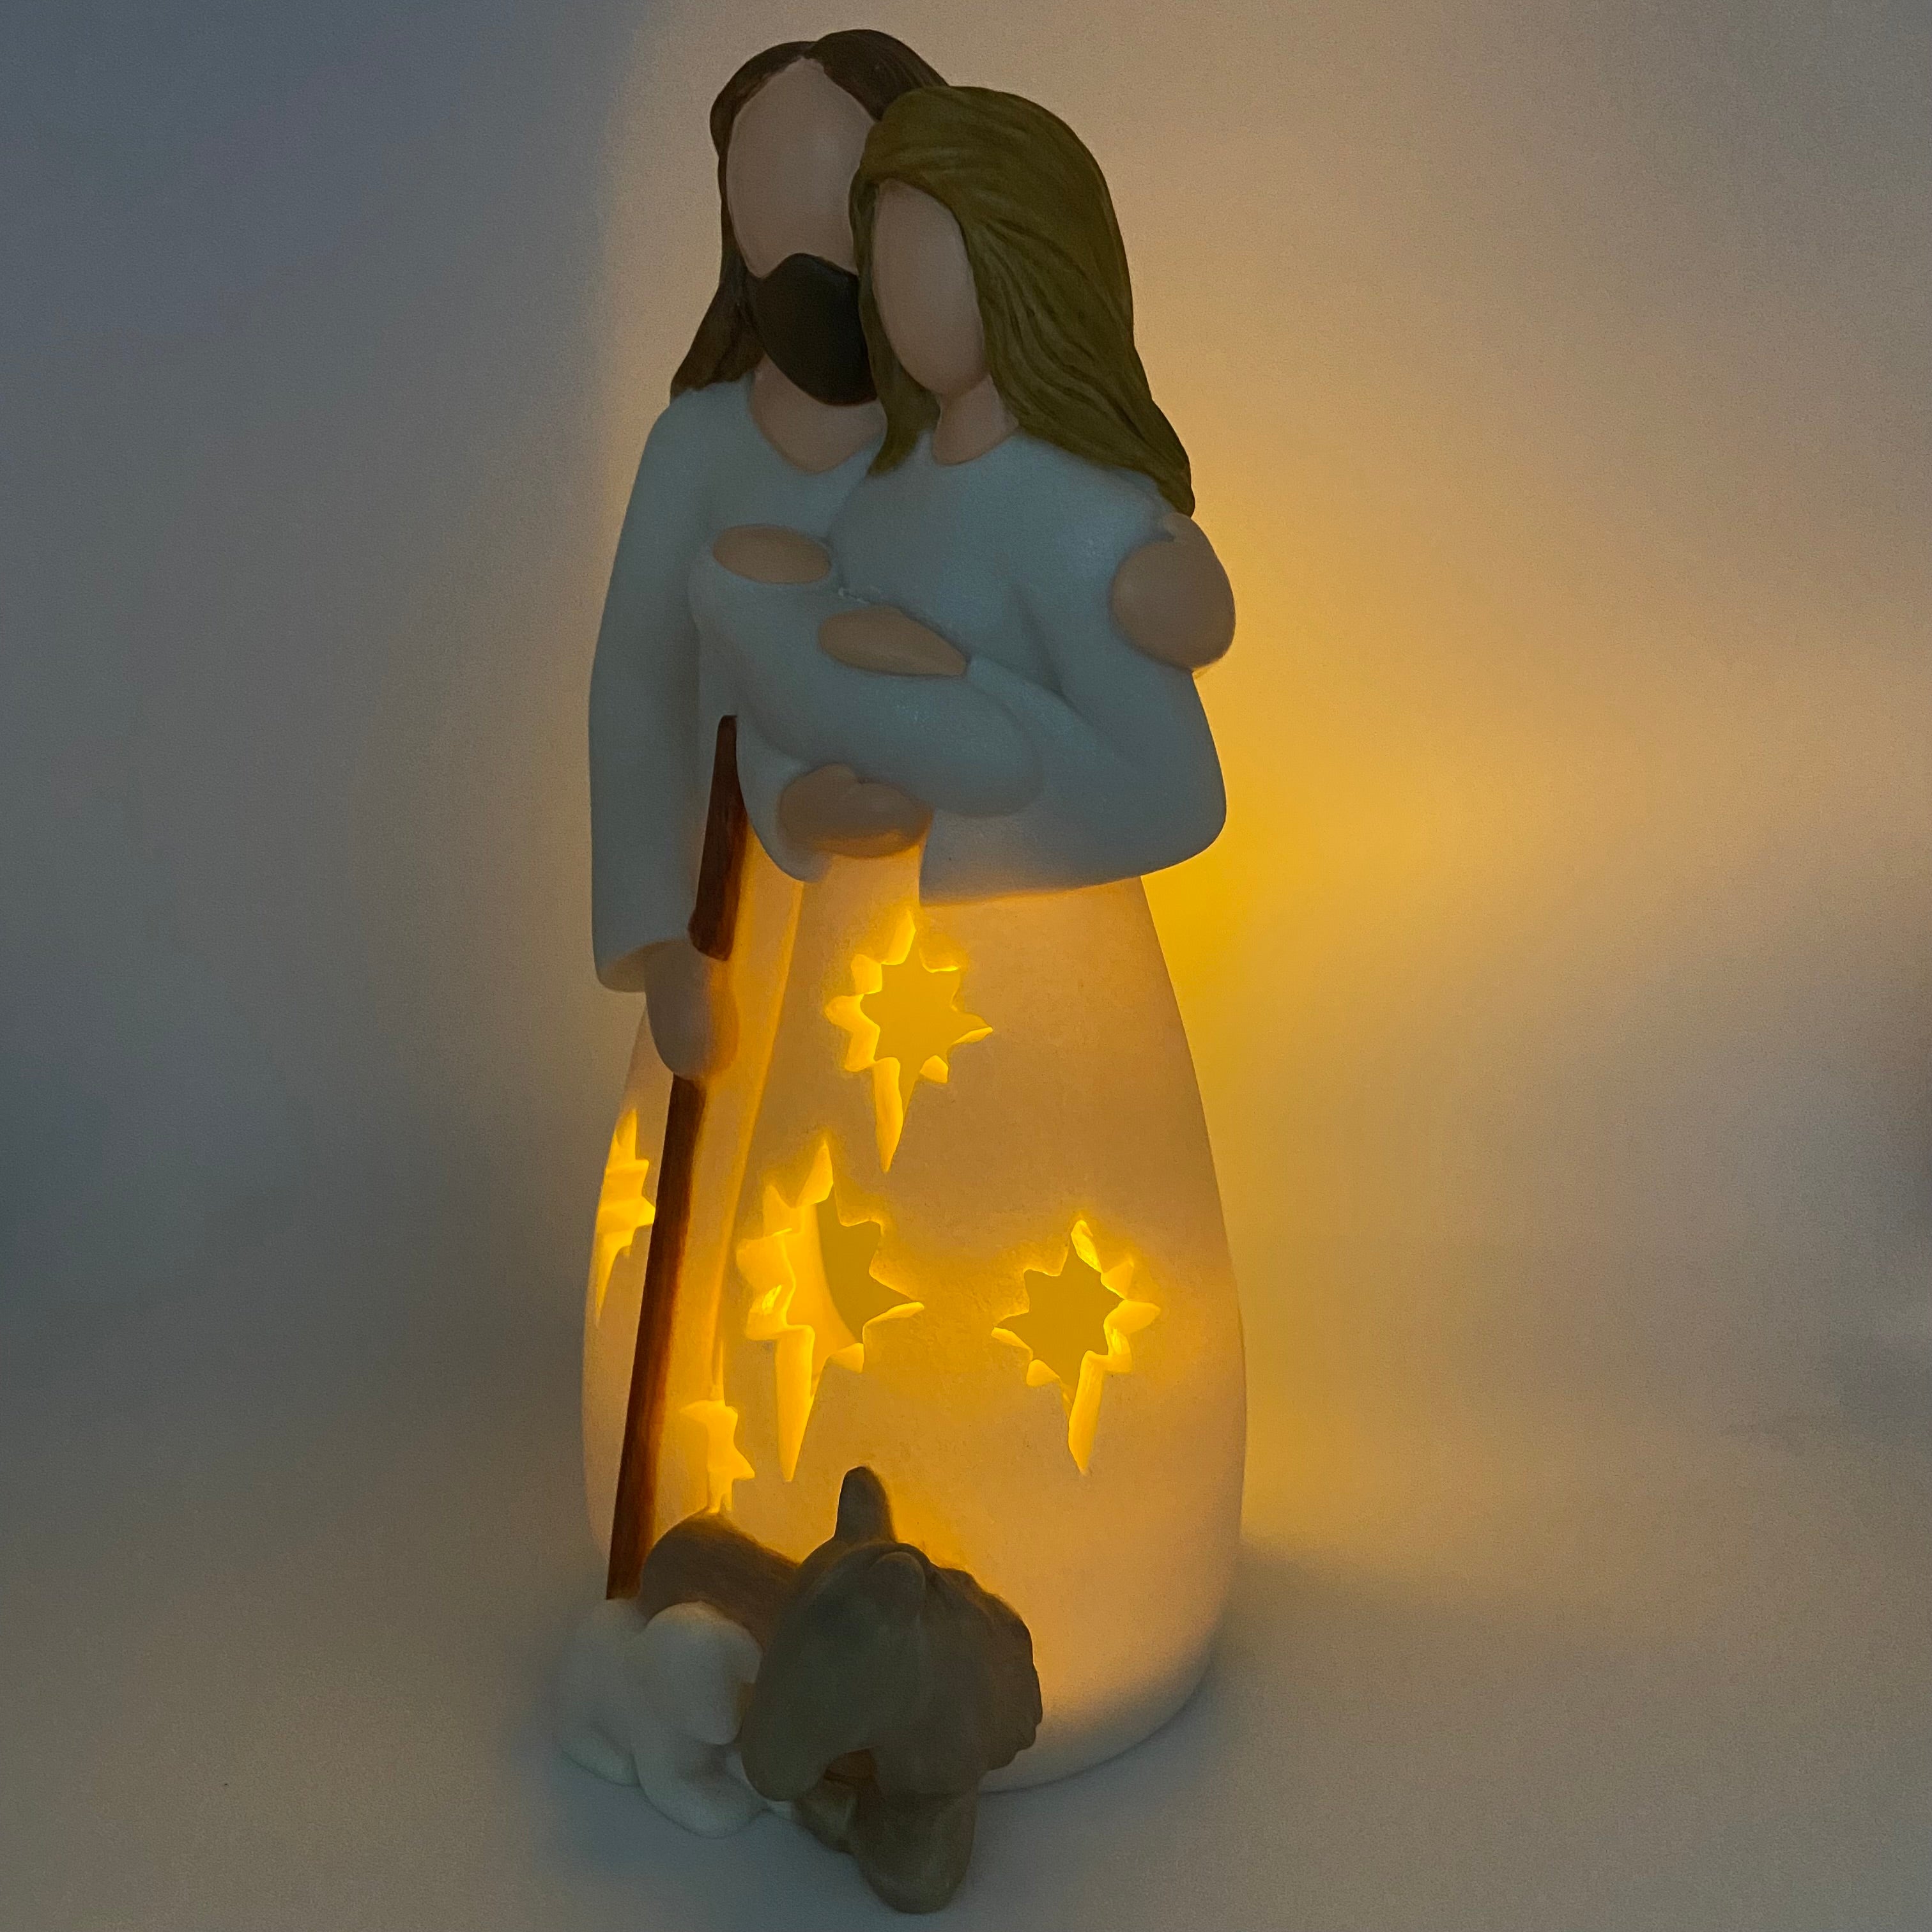 Nativity Sets for Christmas Indoor Candle Holder W/Flickering LED Candle